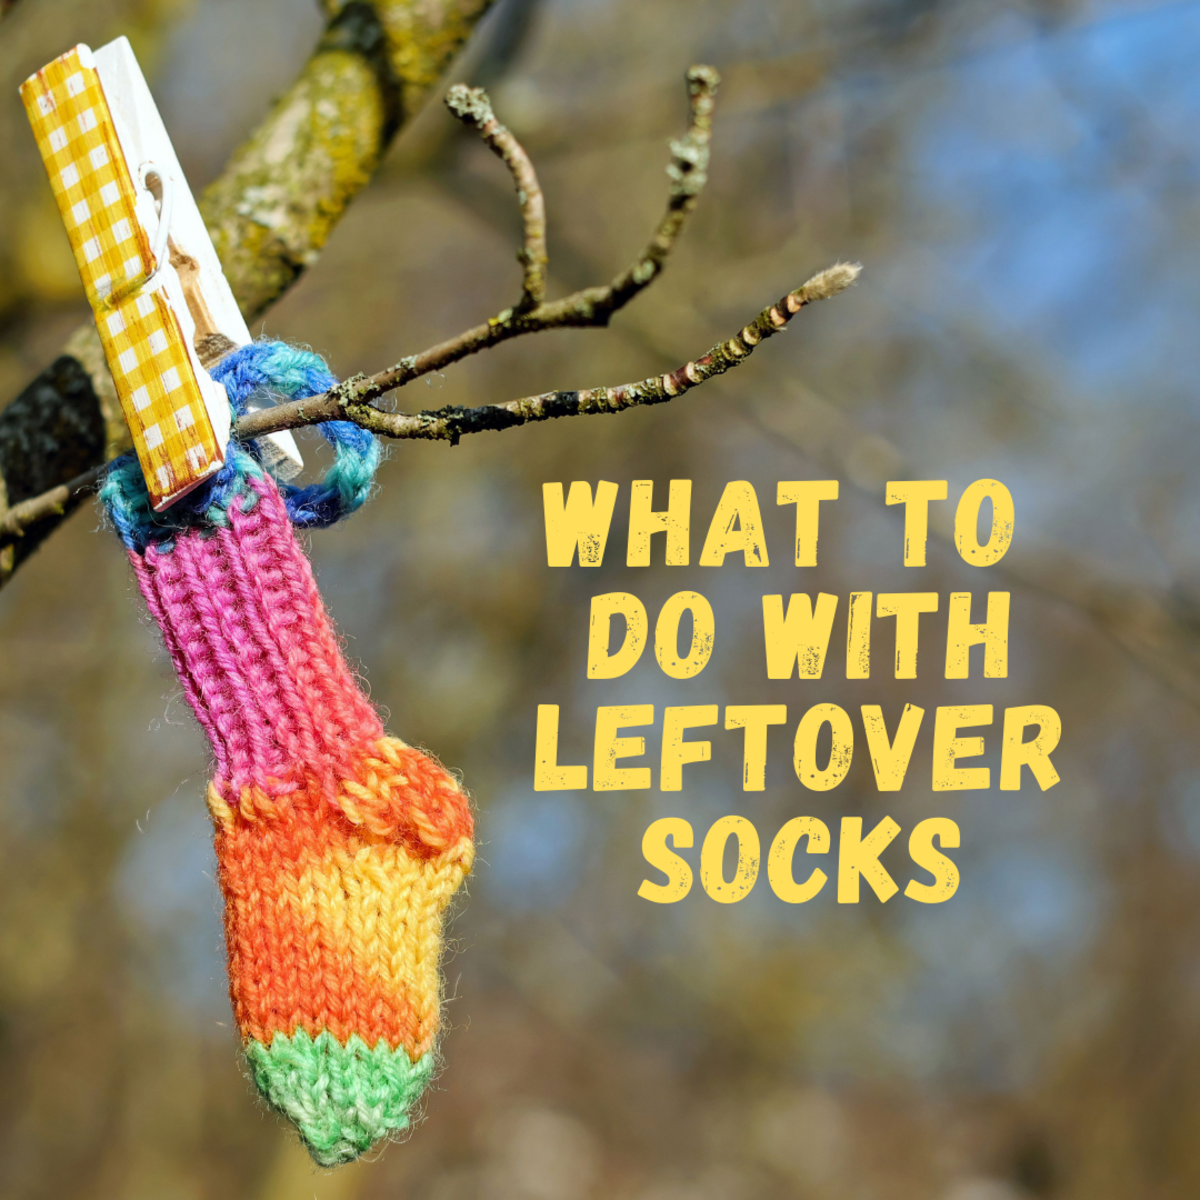 5 Genius Ideas for Leftover and Lost Socks